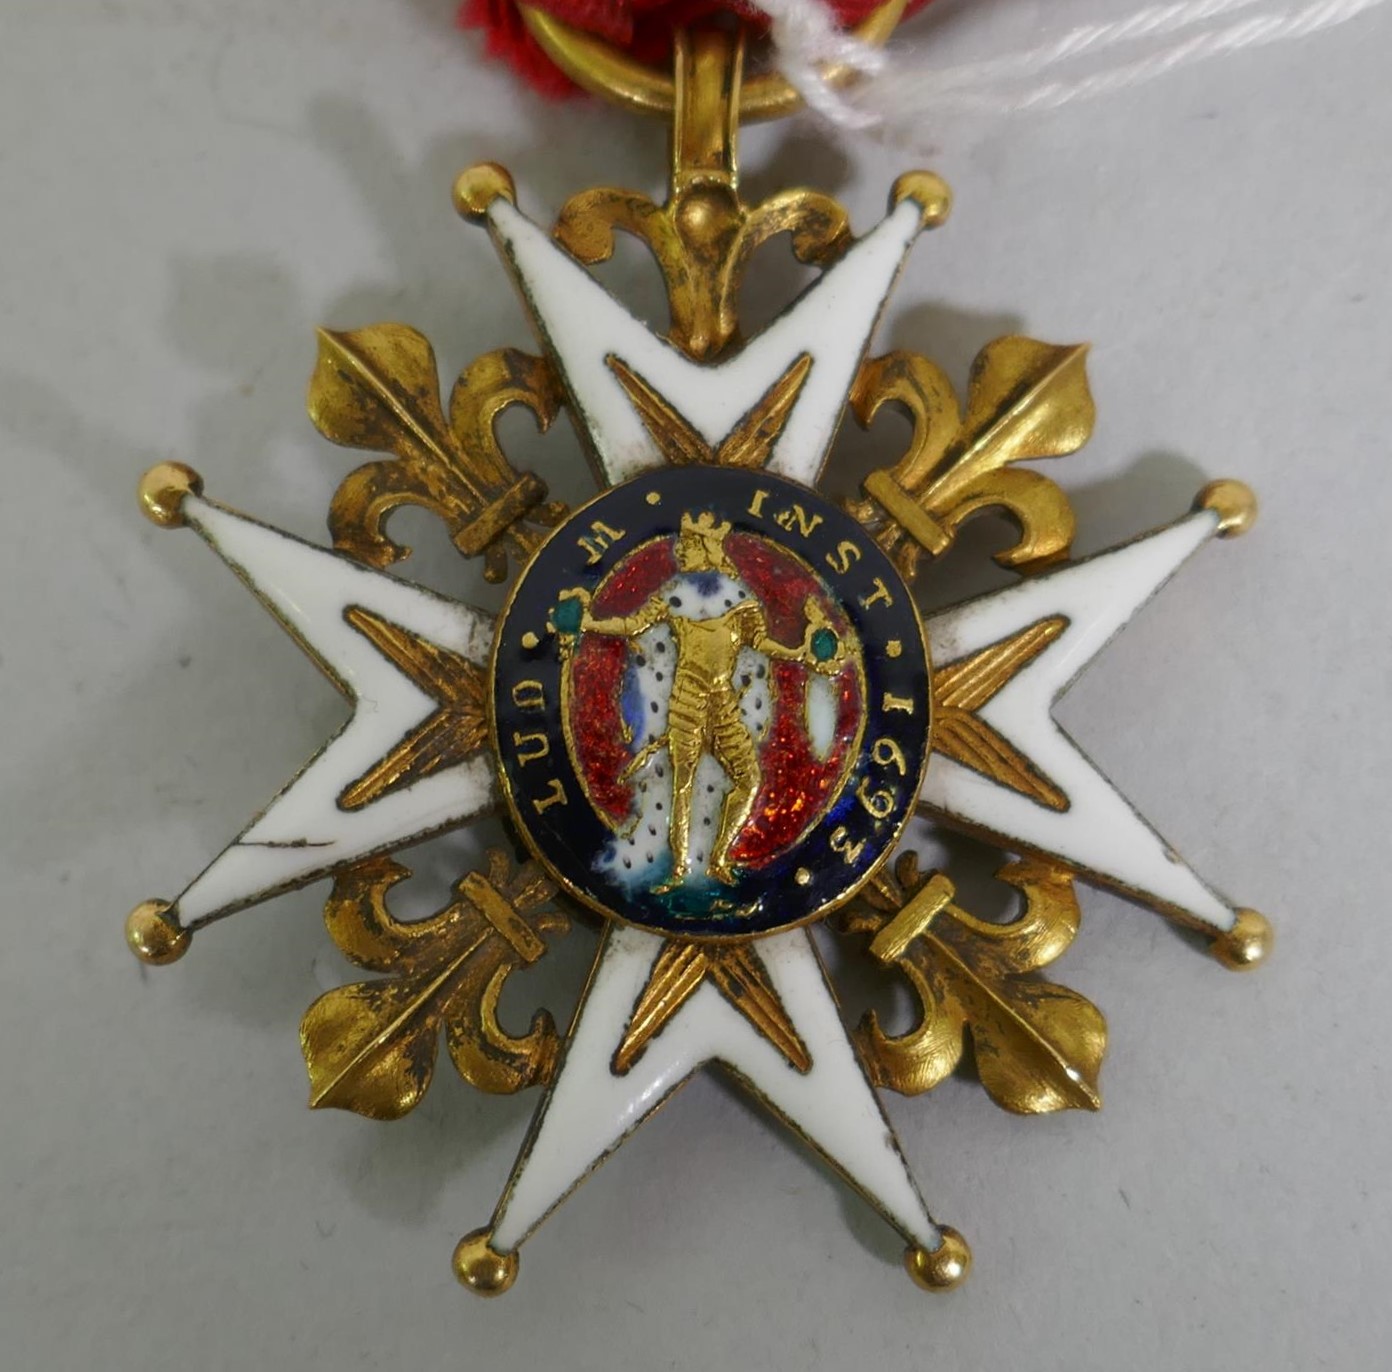 A French military medal, Ordre de Saint Louis, in gold and enamels, 37mm, 16.2g gross, with red silk - Image 2 of 3